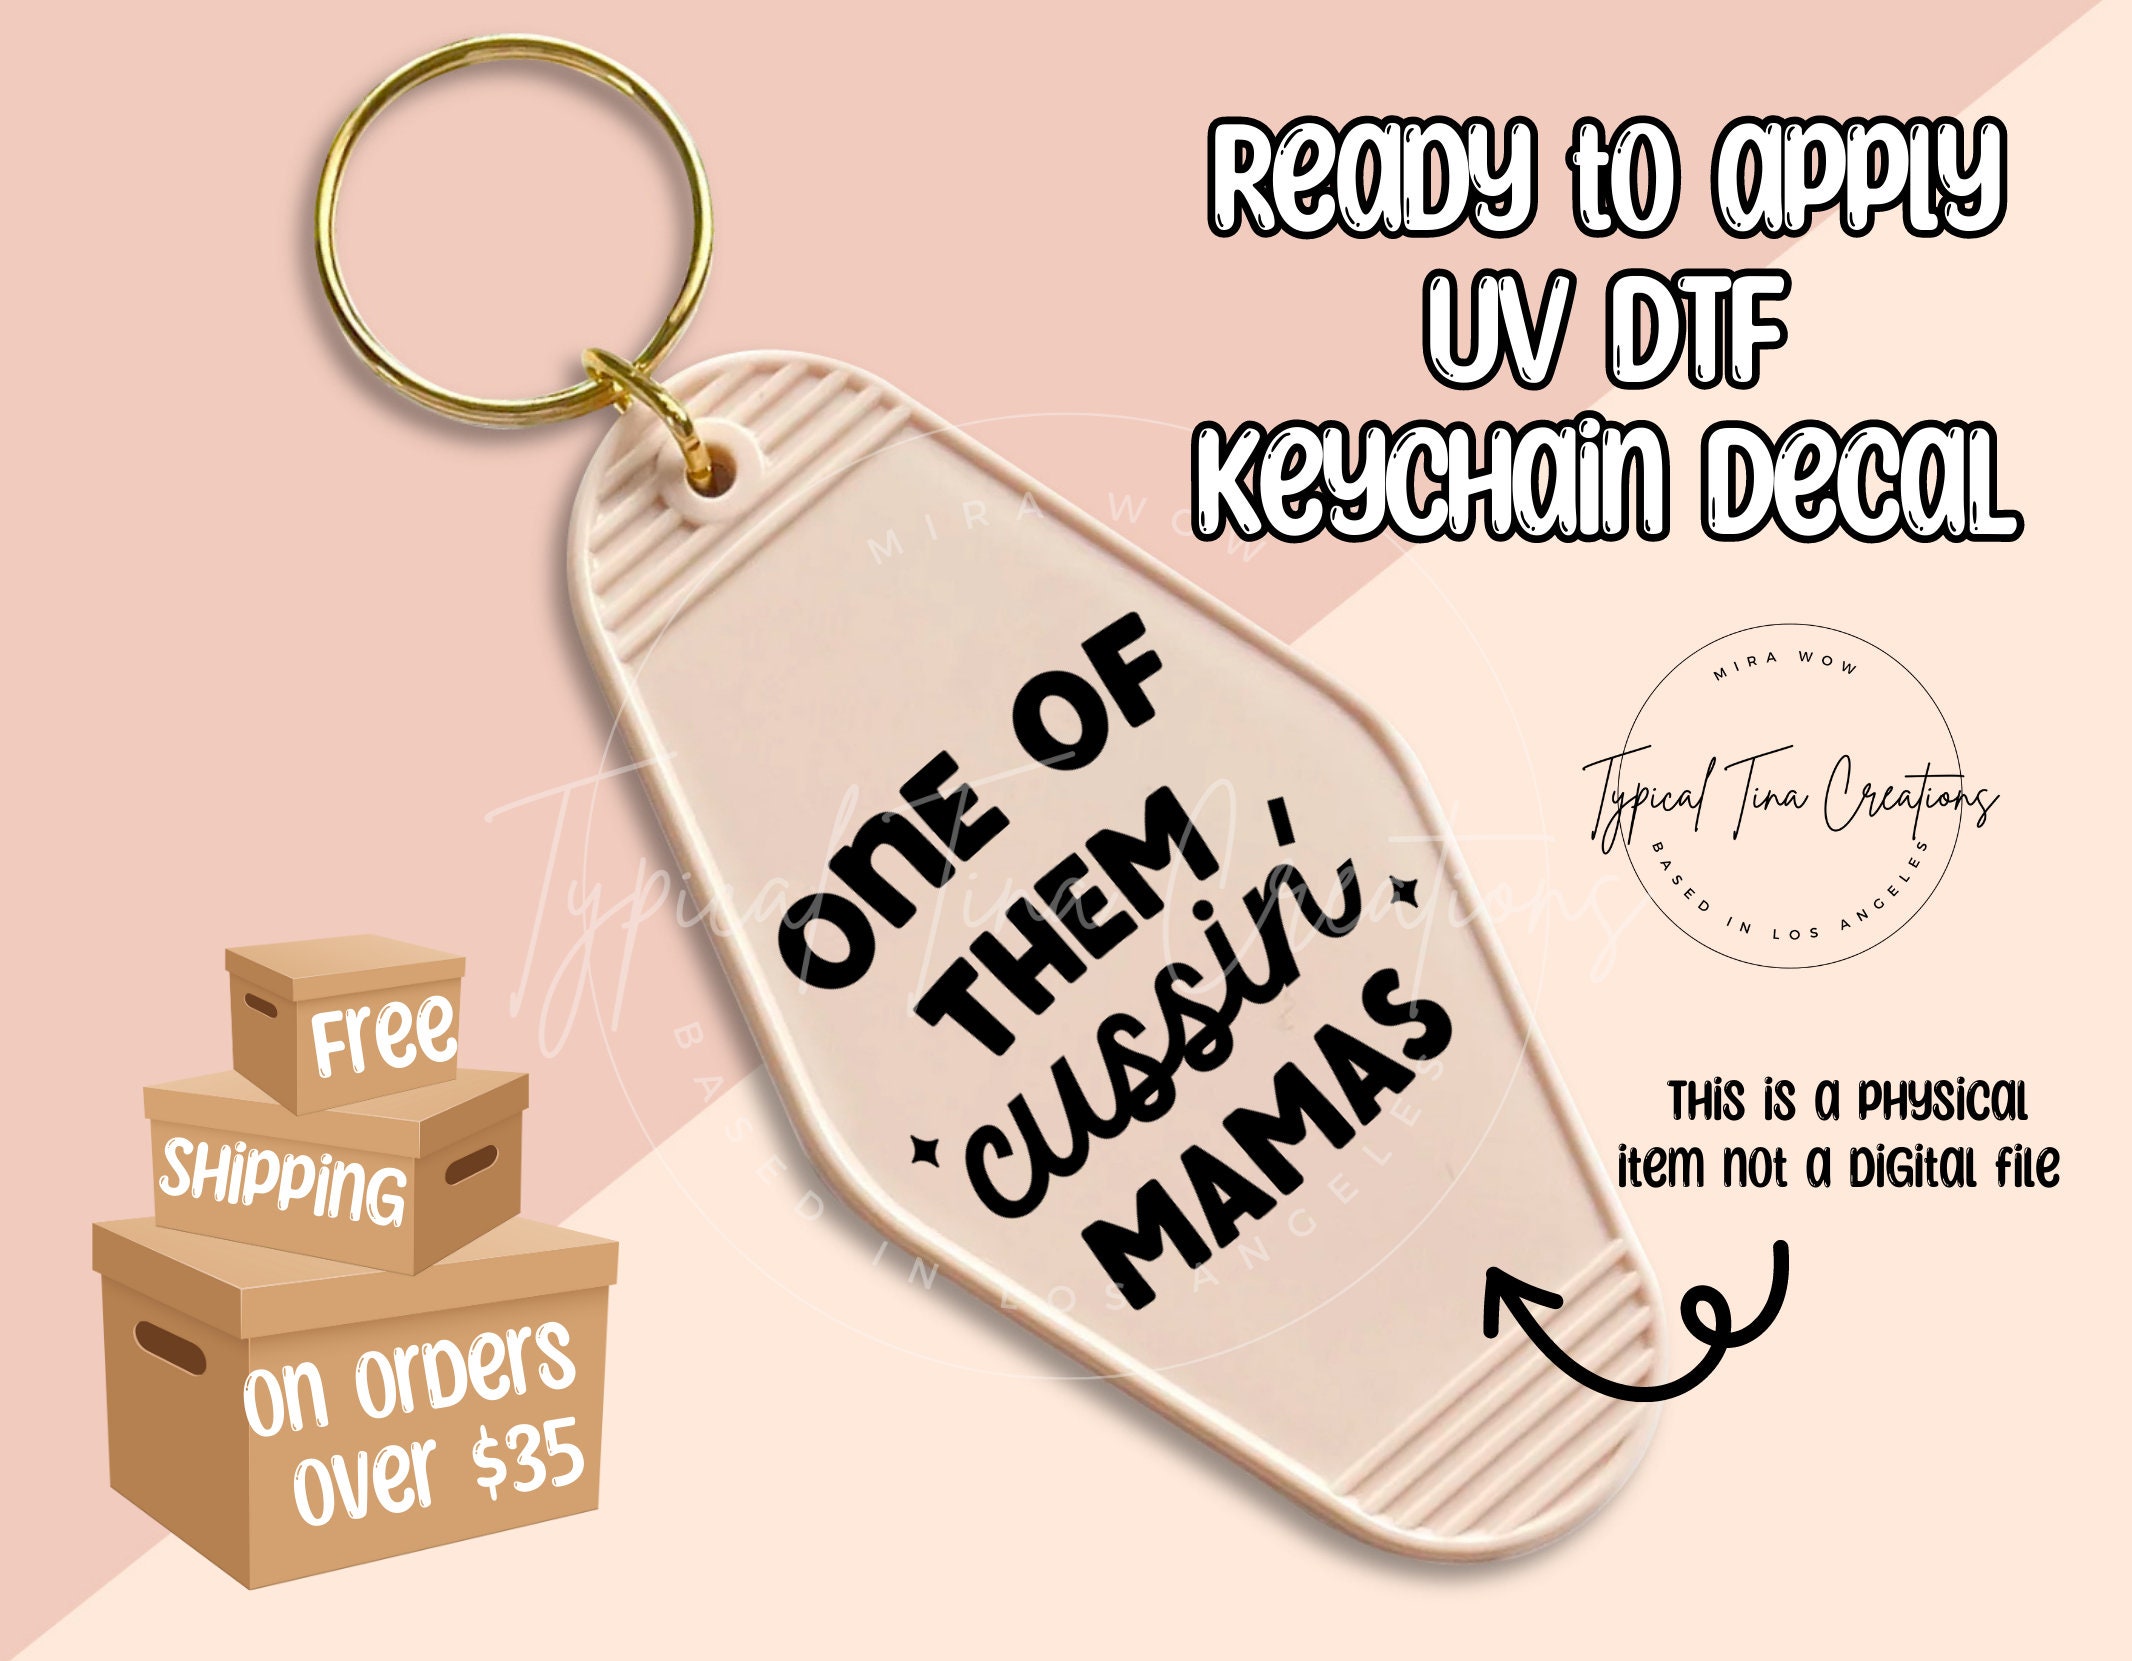 Ready-to-apply UV DTF Keychain Decal, Keychain Stickers, Acrylic Blanks  With Decal, Uv Dtf Decals, UV Printed Keychain Decal 